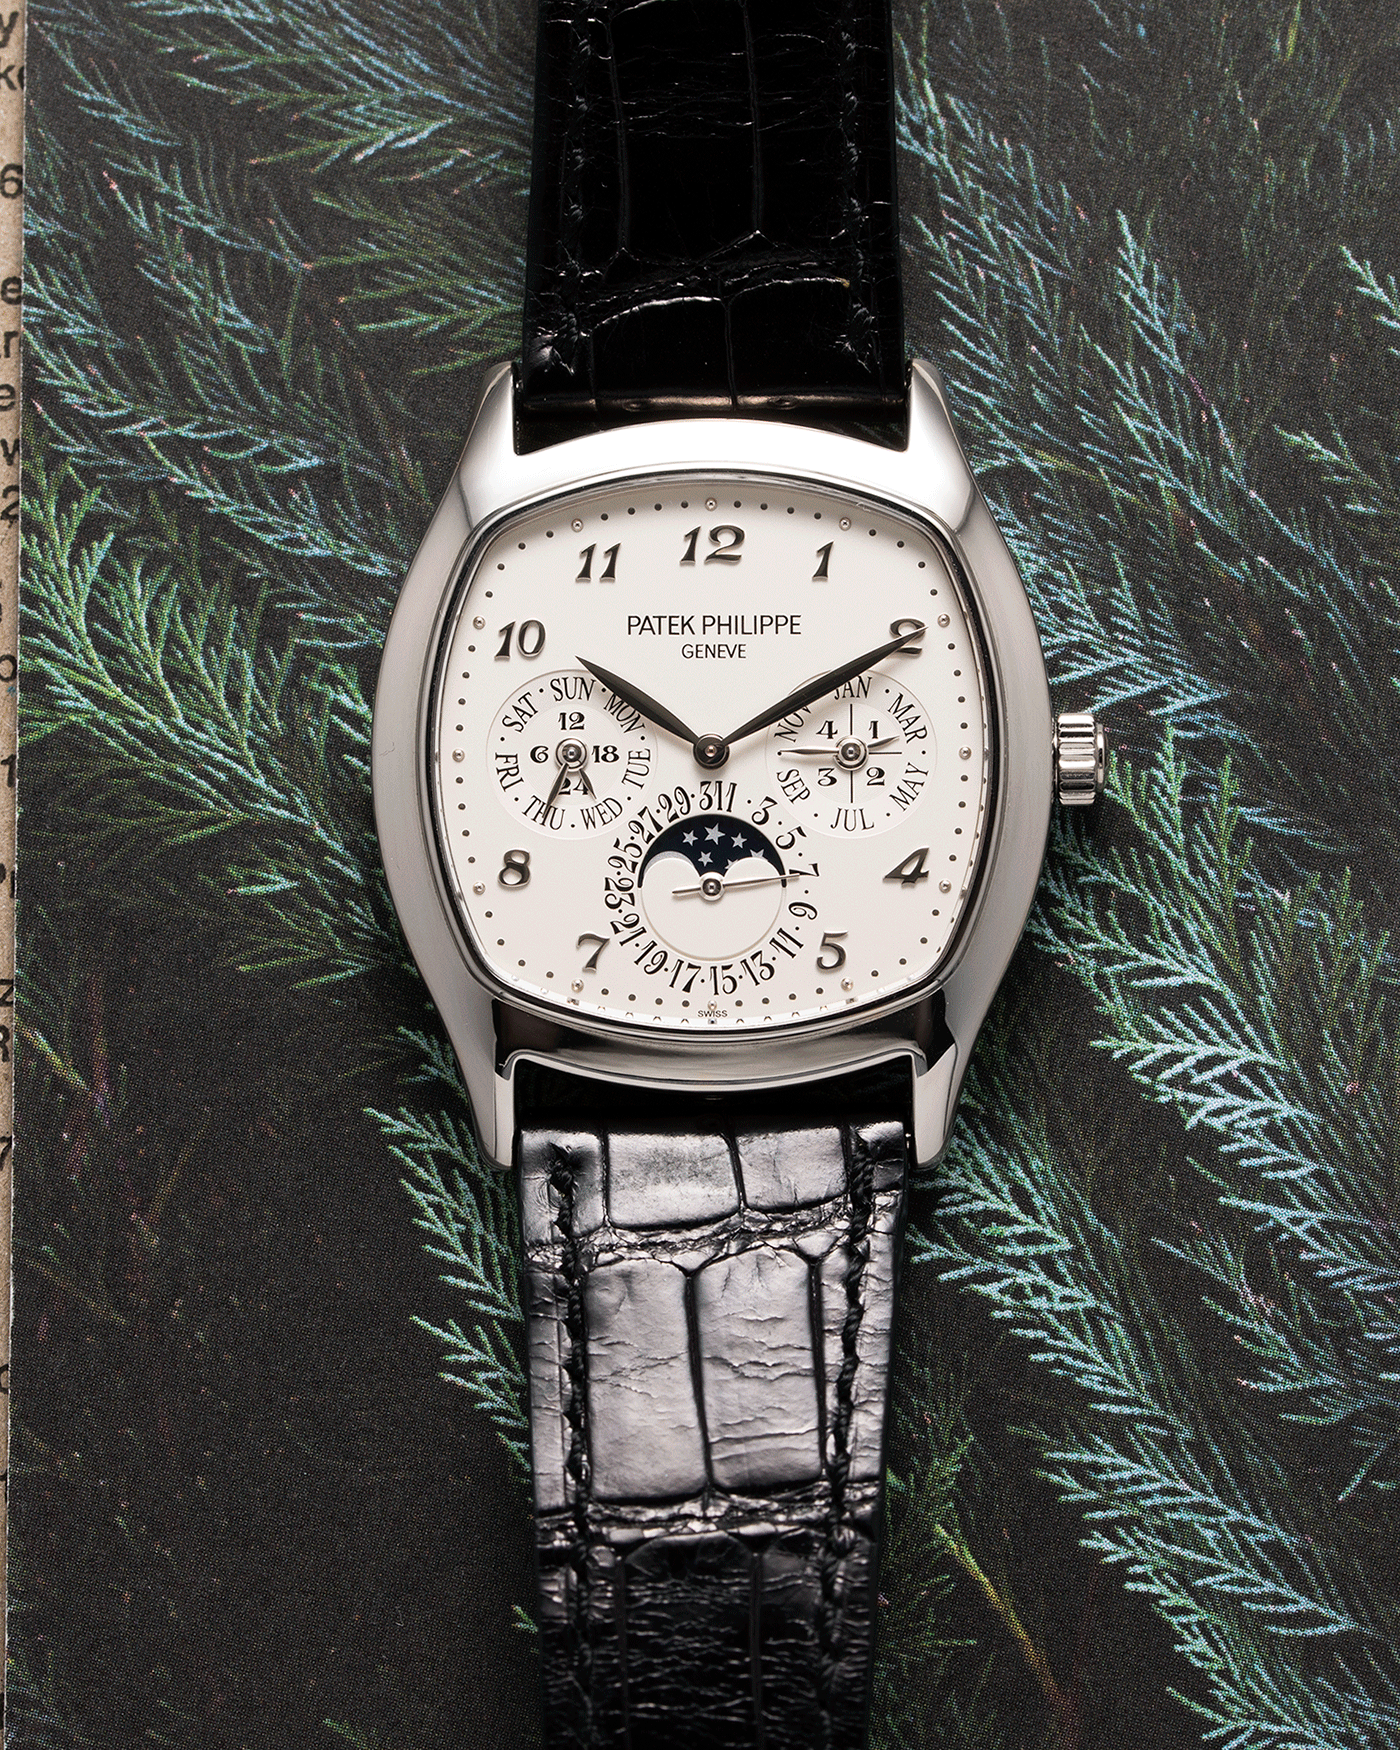 Brand: Patek Philippe Year: 2018 Model: Perpetual Calendar Reference Number: 5940G Material: White Gold Movement: Cal 240Q Case Diameter: 37mm Bracelet: Patek Philippe Black Alligator Strap with White Gold Tang Buckle